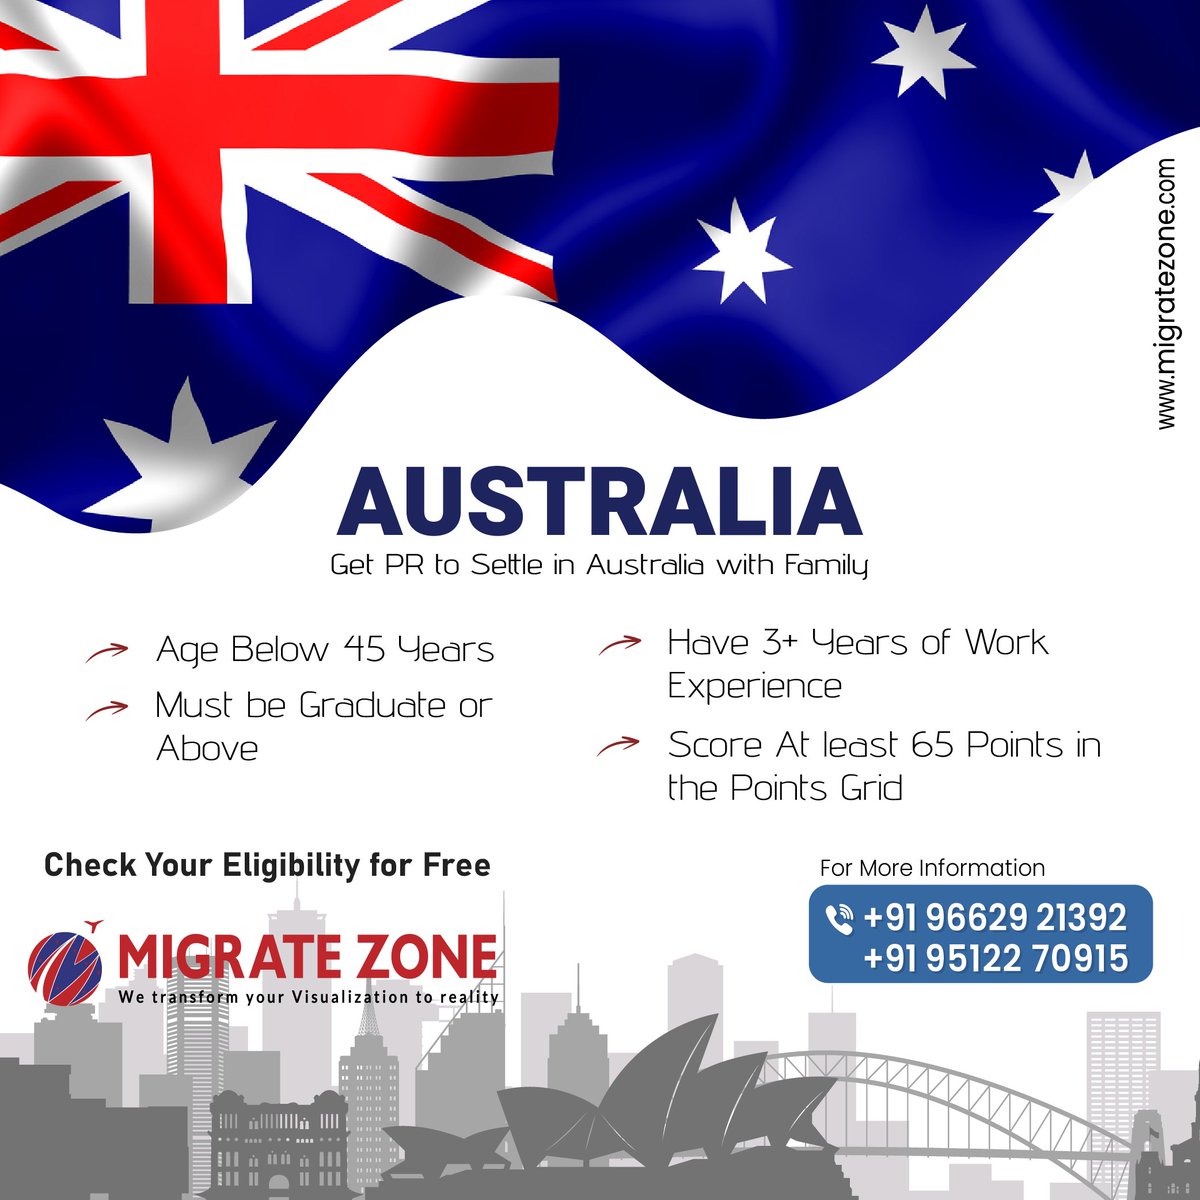 Dreams do come true! We're so grateful to have been granted Australian PR. Now, we can finally settle down and build a better life for our family in this amazing country.✈️
.
.
#Migratezone #PR #dreamaustralia #familyvisa #austalia